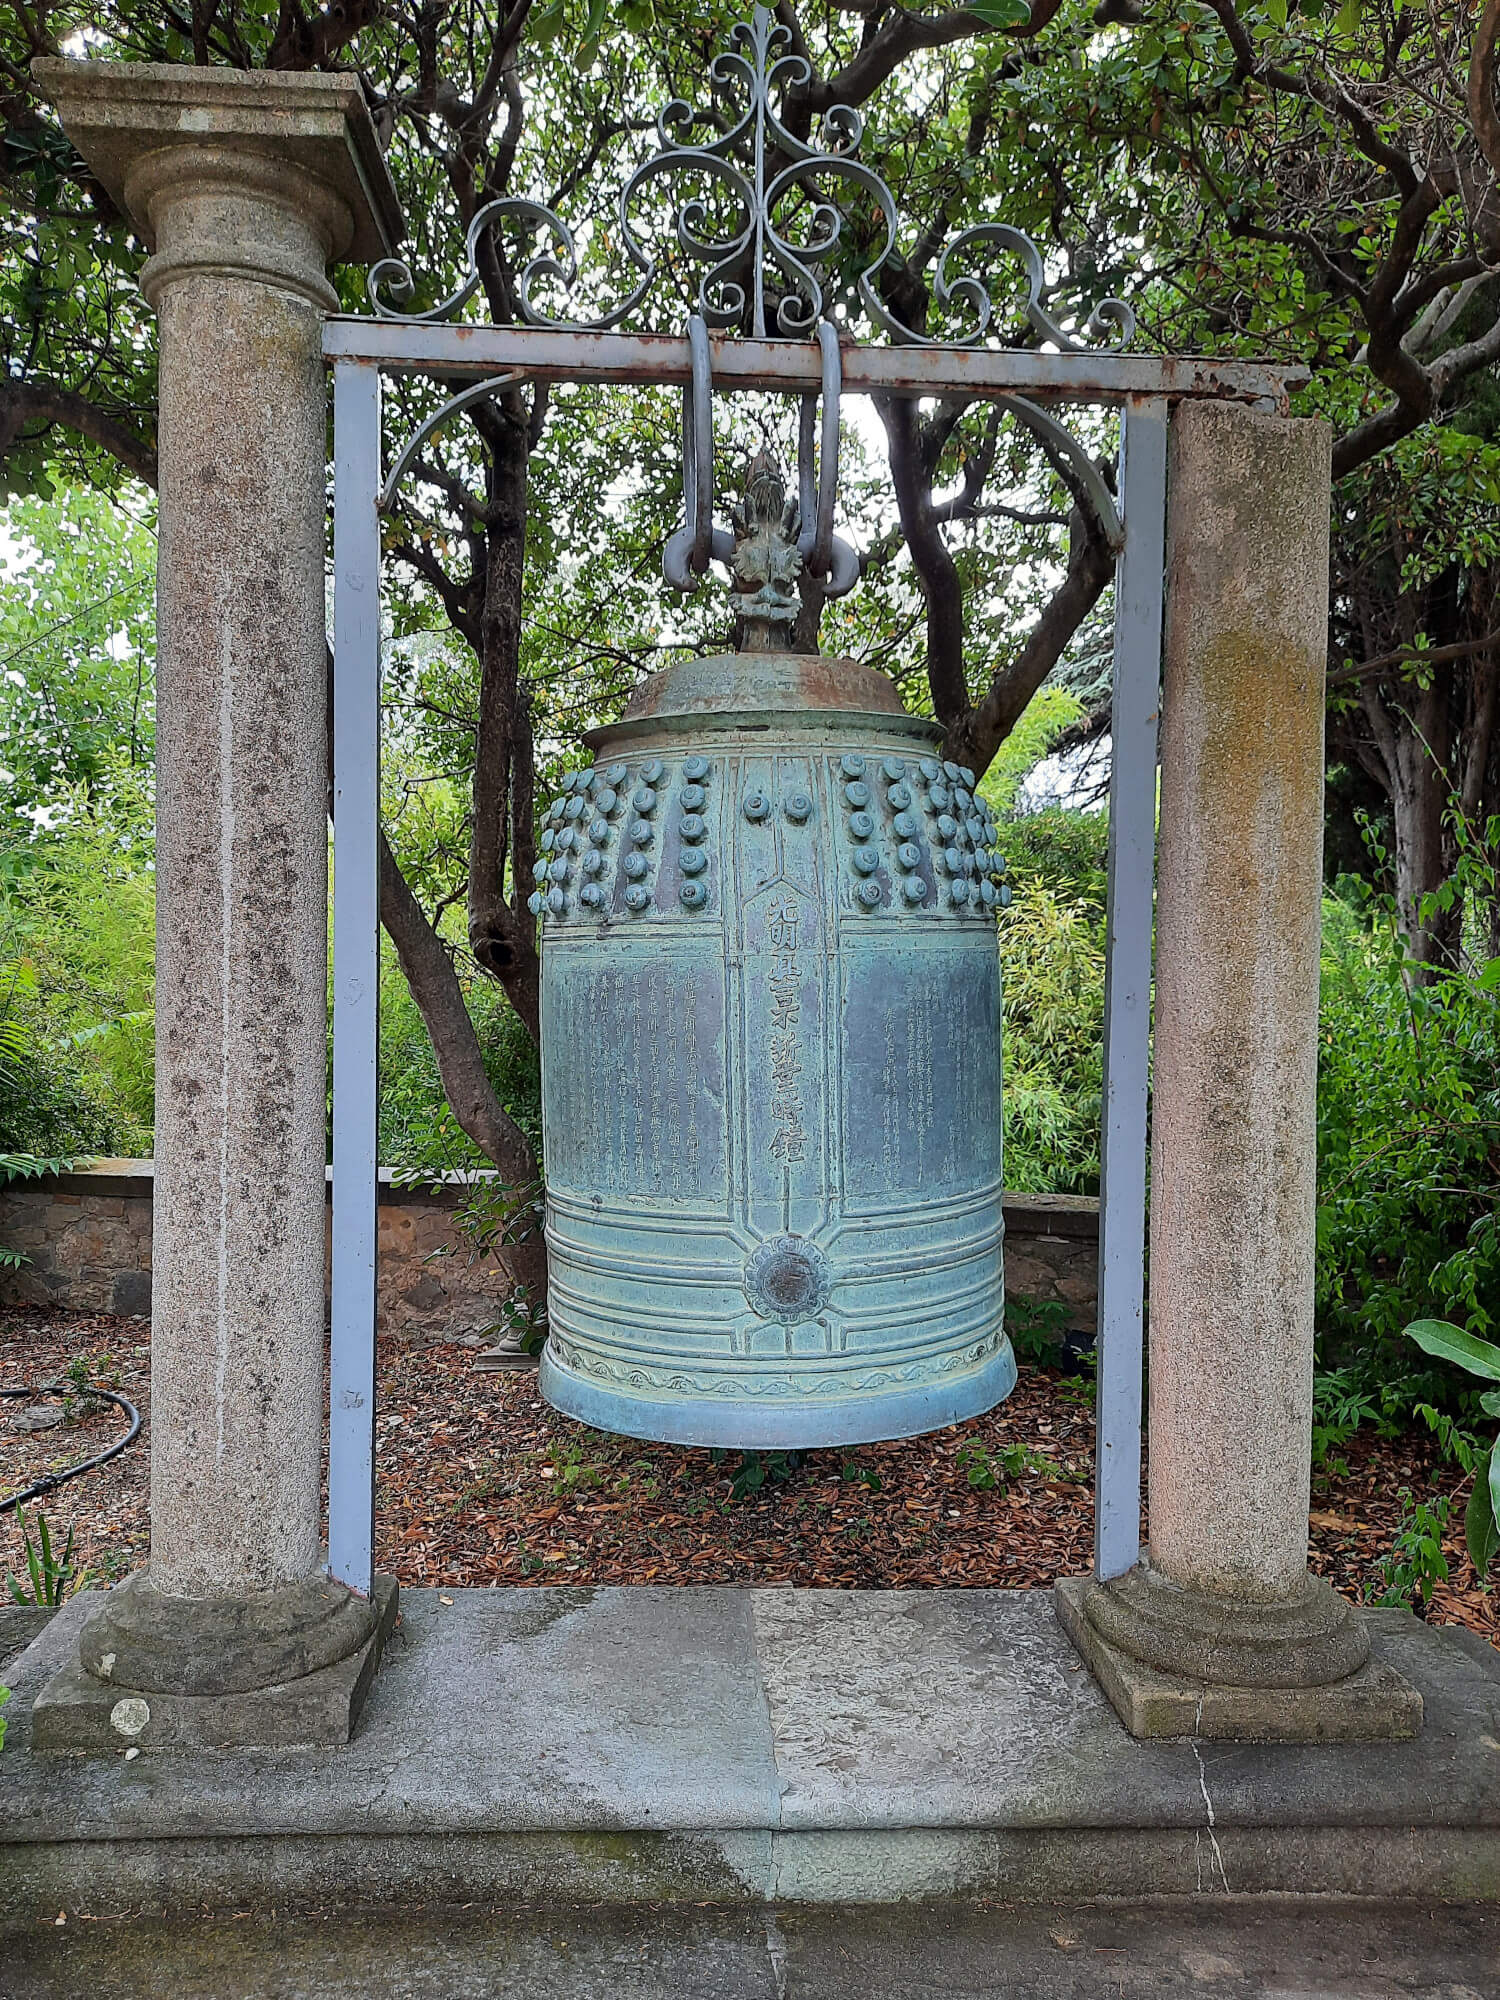 The Japanese bell